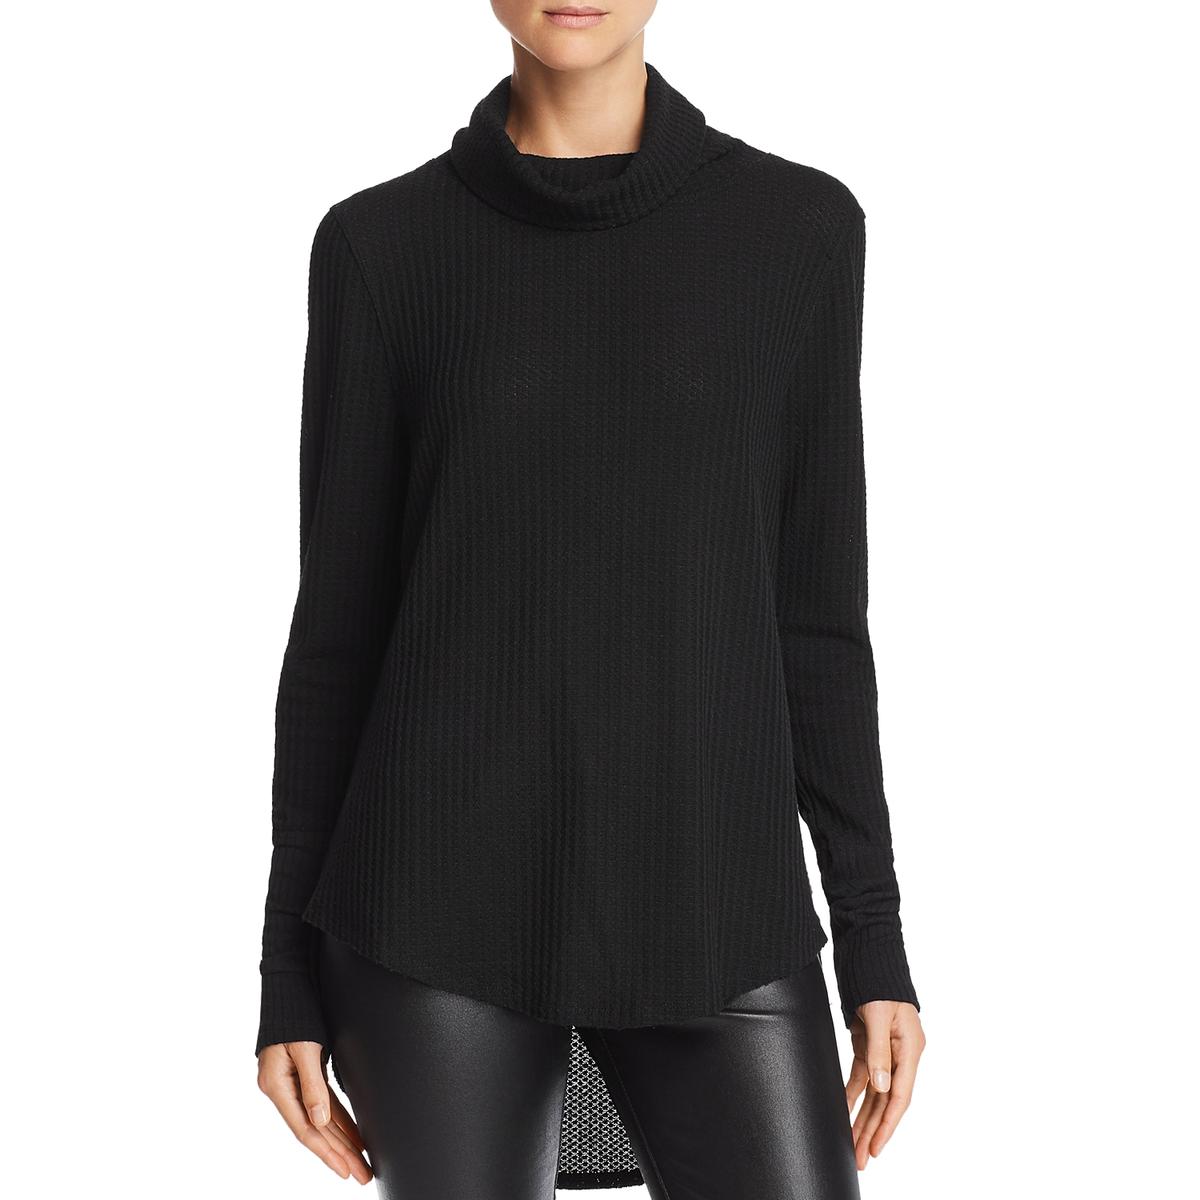 Theo & Spence Womens Black Textured Turtleneck Thermal Top Shirt XS ...